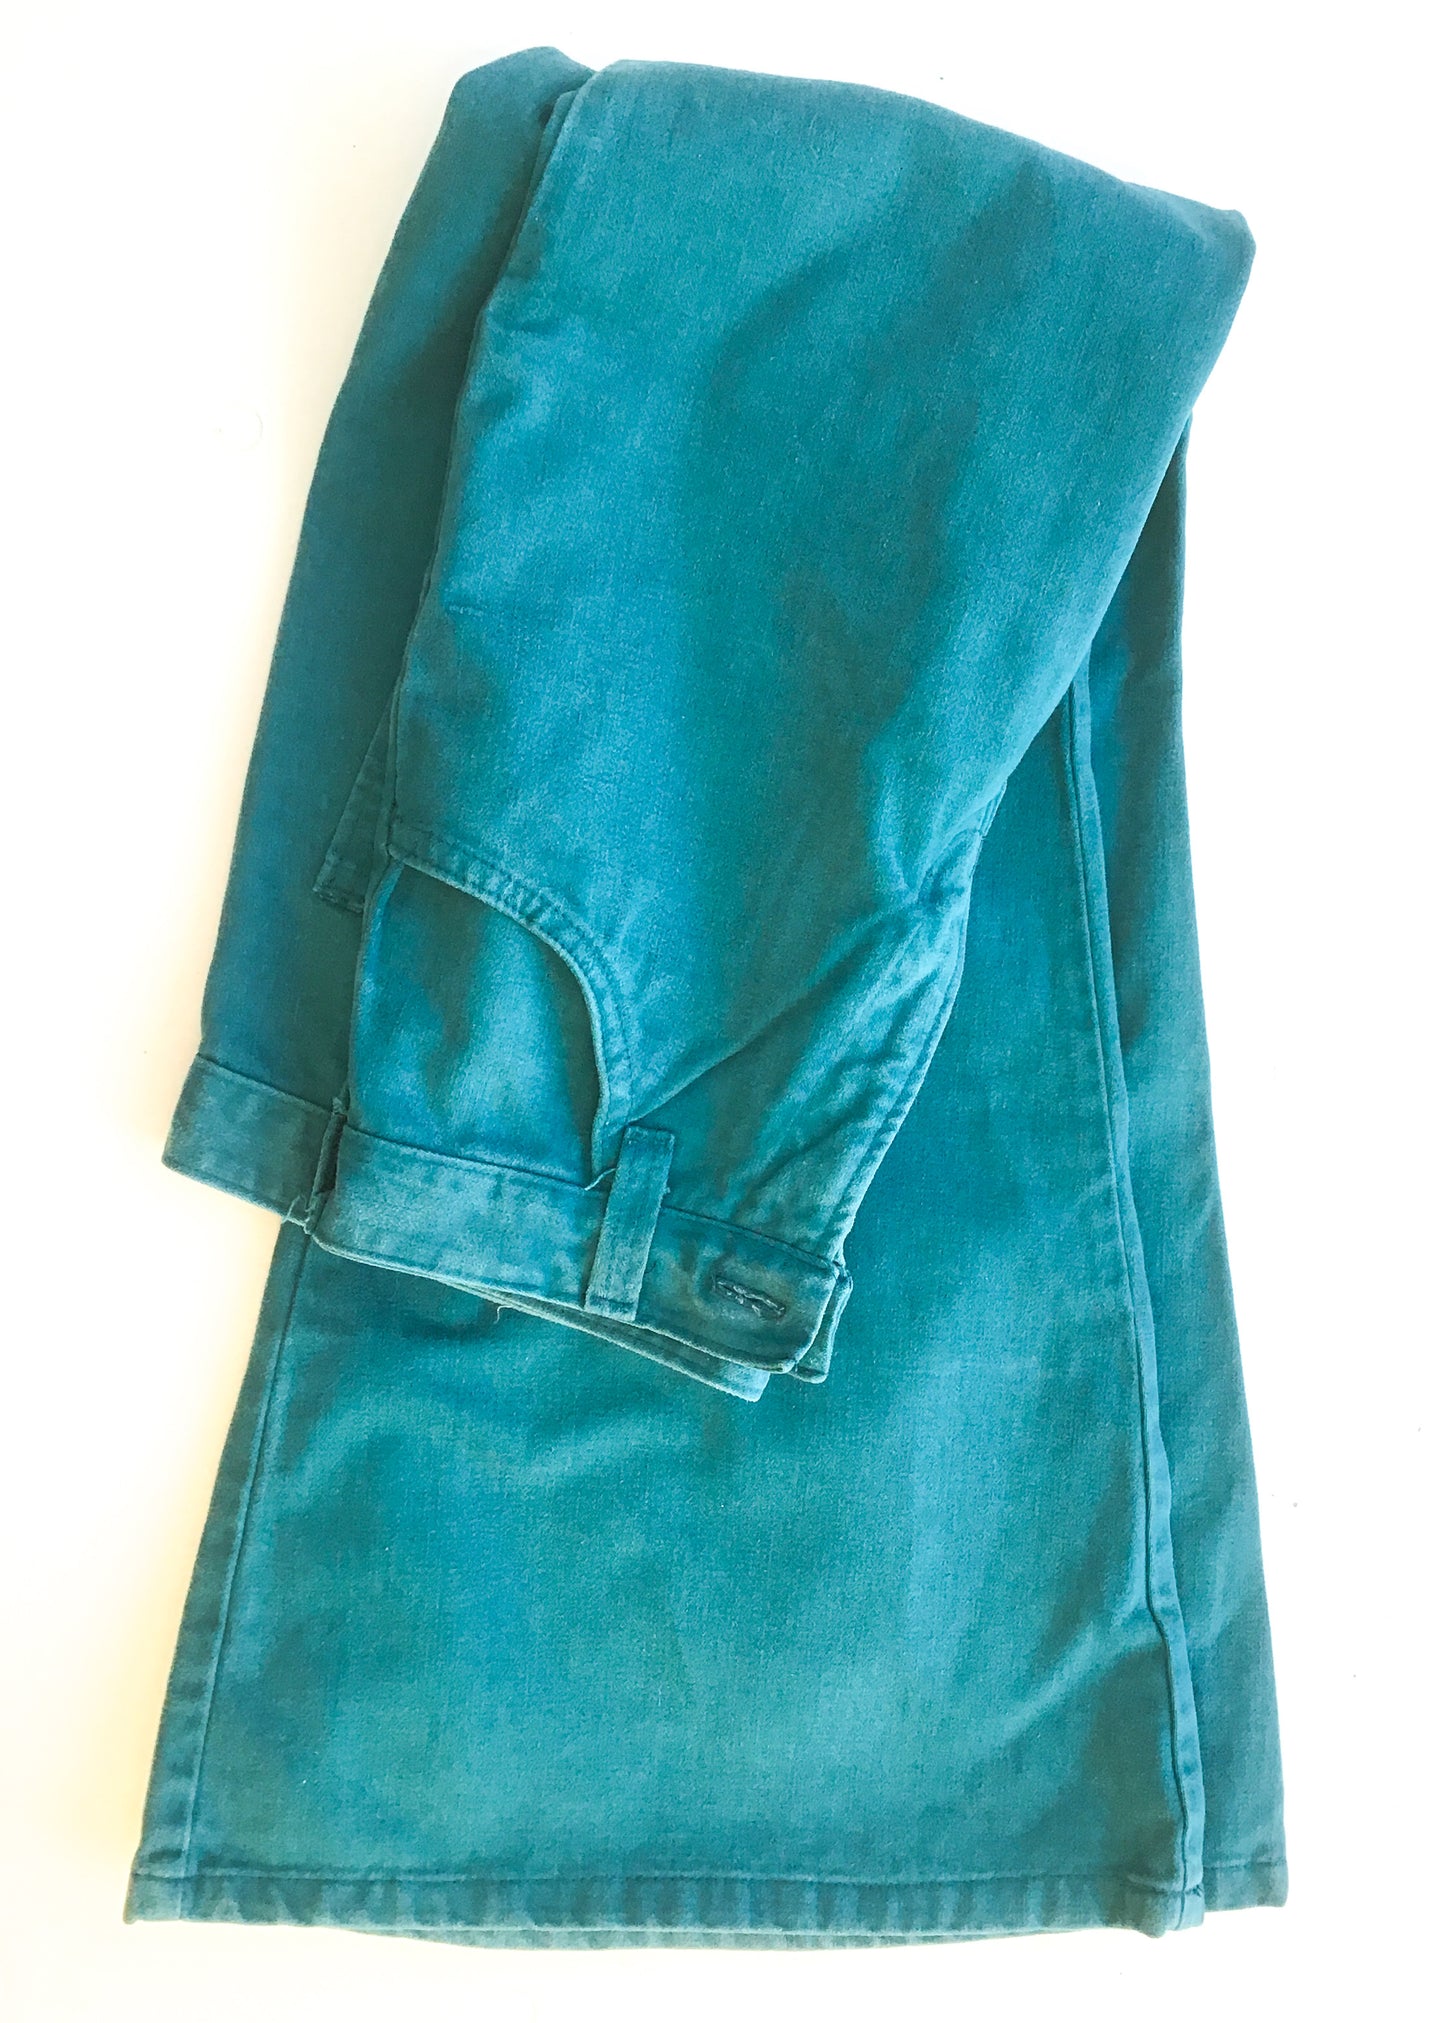 1970s Vintage Turquoise Elephant Bell Bottom Flared Jeans • HIgh Waist 28”W